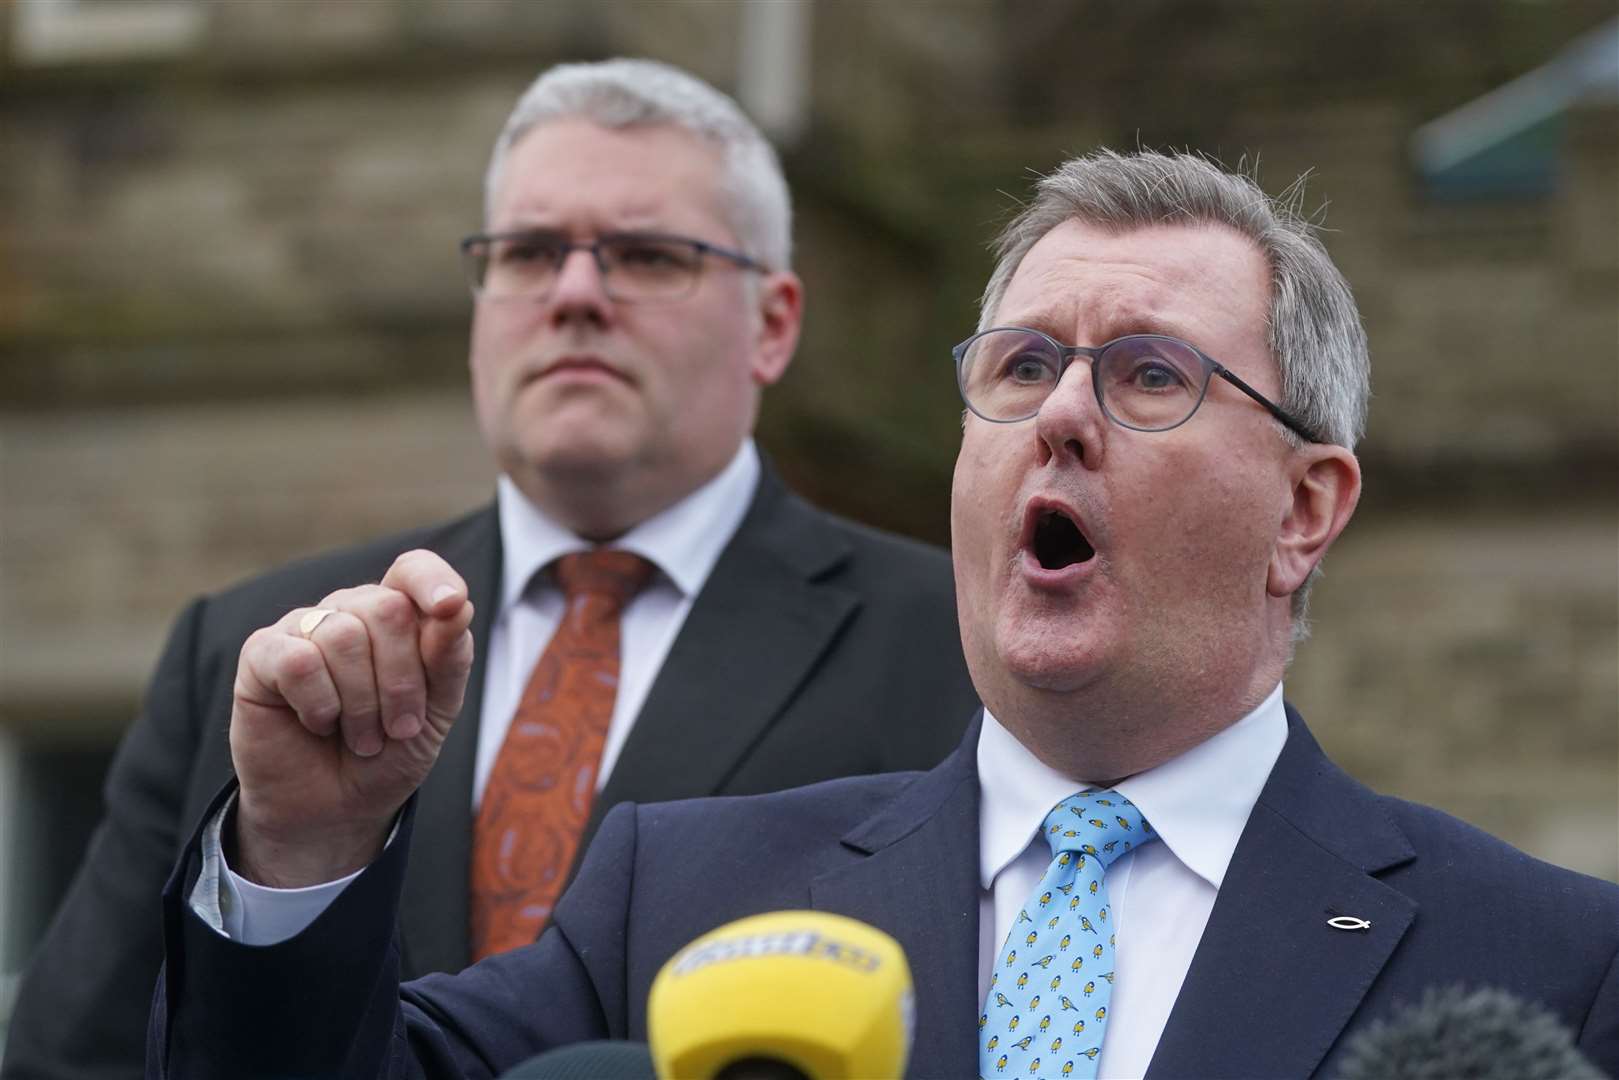 DUP leader Sir Jeffery Donaldson said the new executive needed to have a sense of what its priorities are (Brian Lawless/PA)